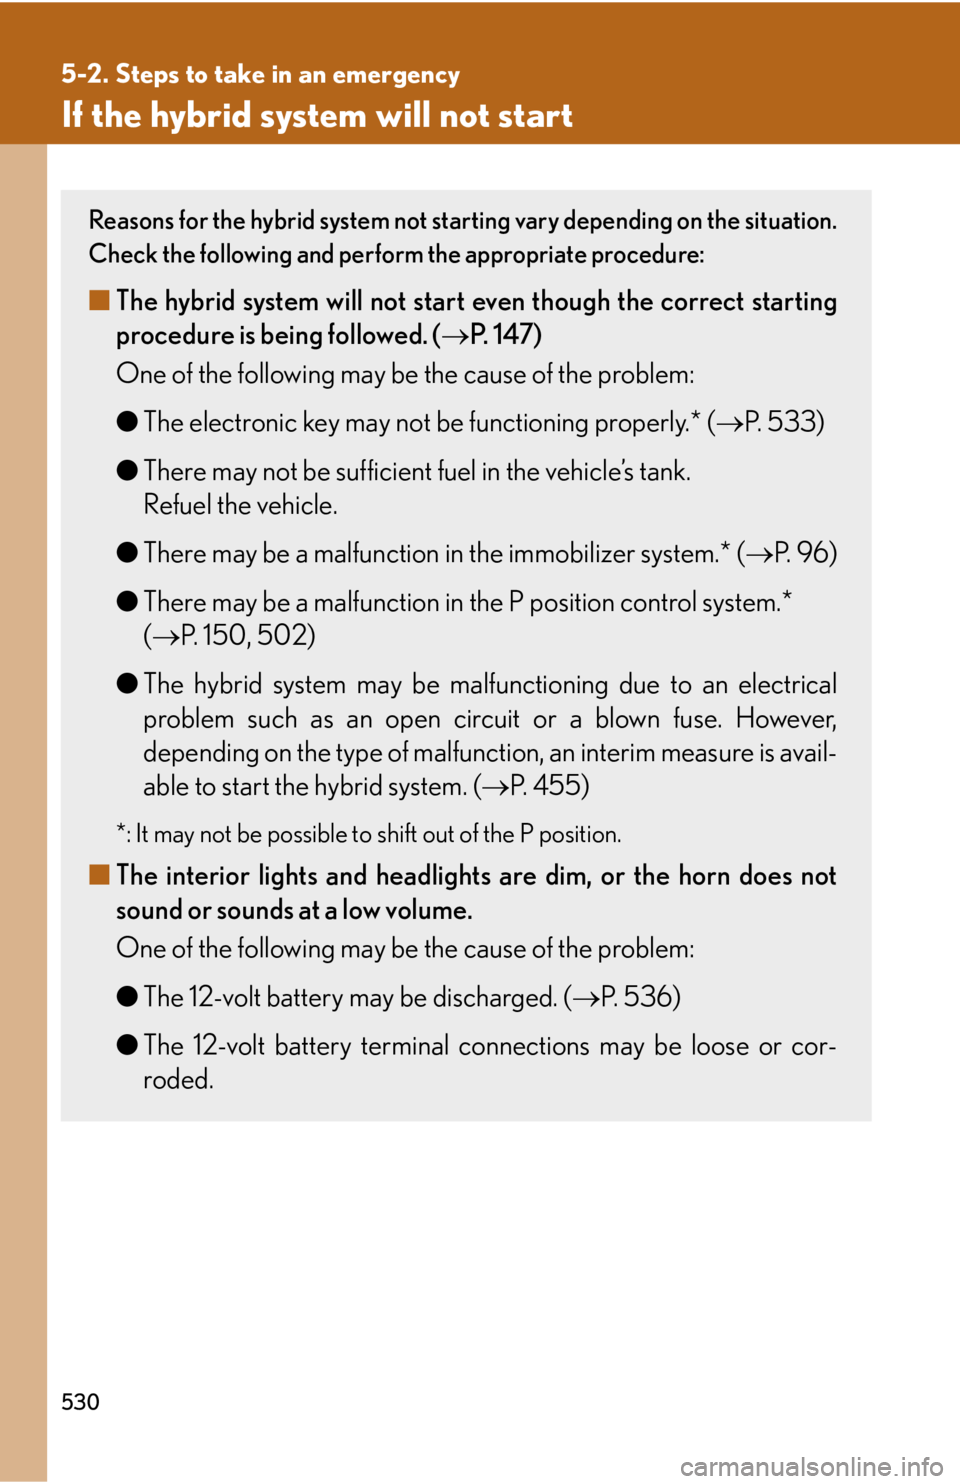 Lexus HS250h 2010  Using the Bluetooth audio system / LEXUS 2010 HS250H OWNERS MANUAL (OM75006U) 530
5-2. Steps to take in an emergency
If the hybrid system will not start
Reasons for the hybrid system not starting vary depending on the situation. 
Check the following and perform the appropriate 